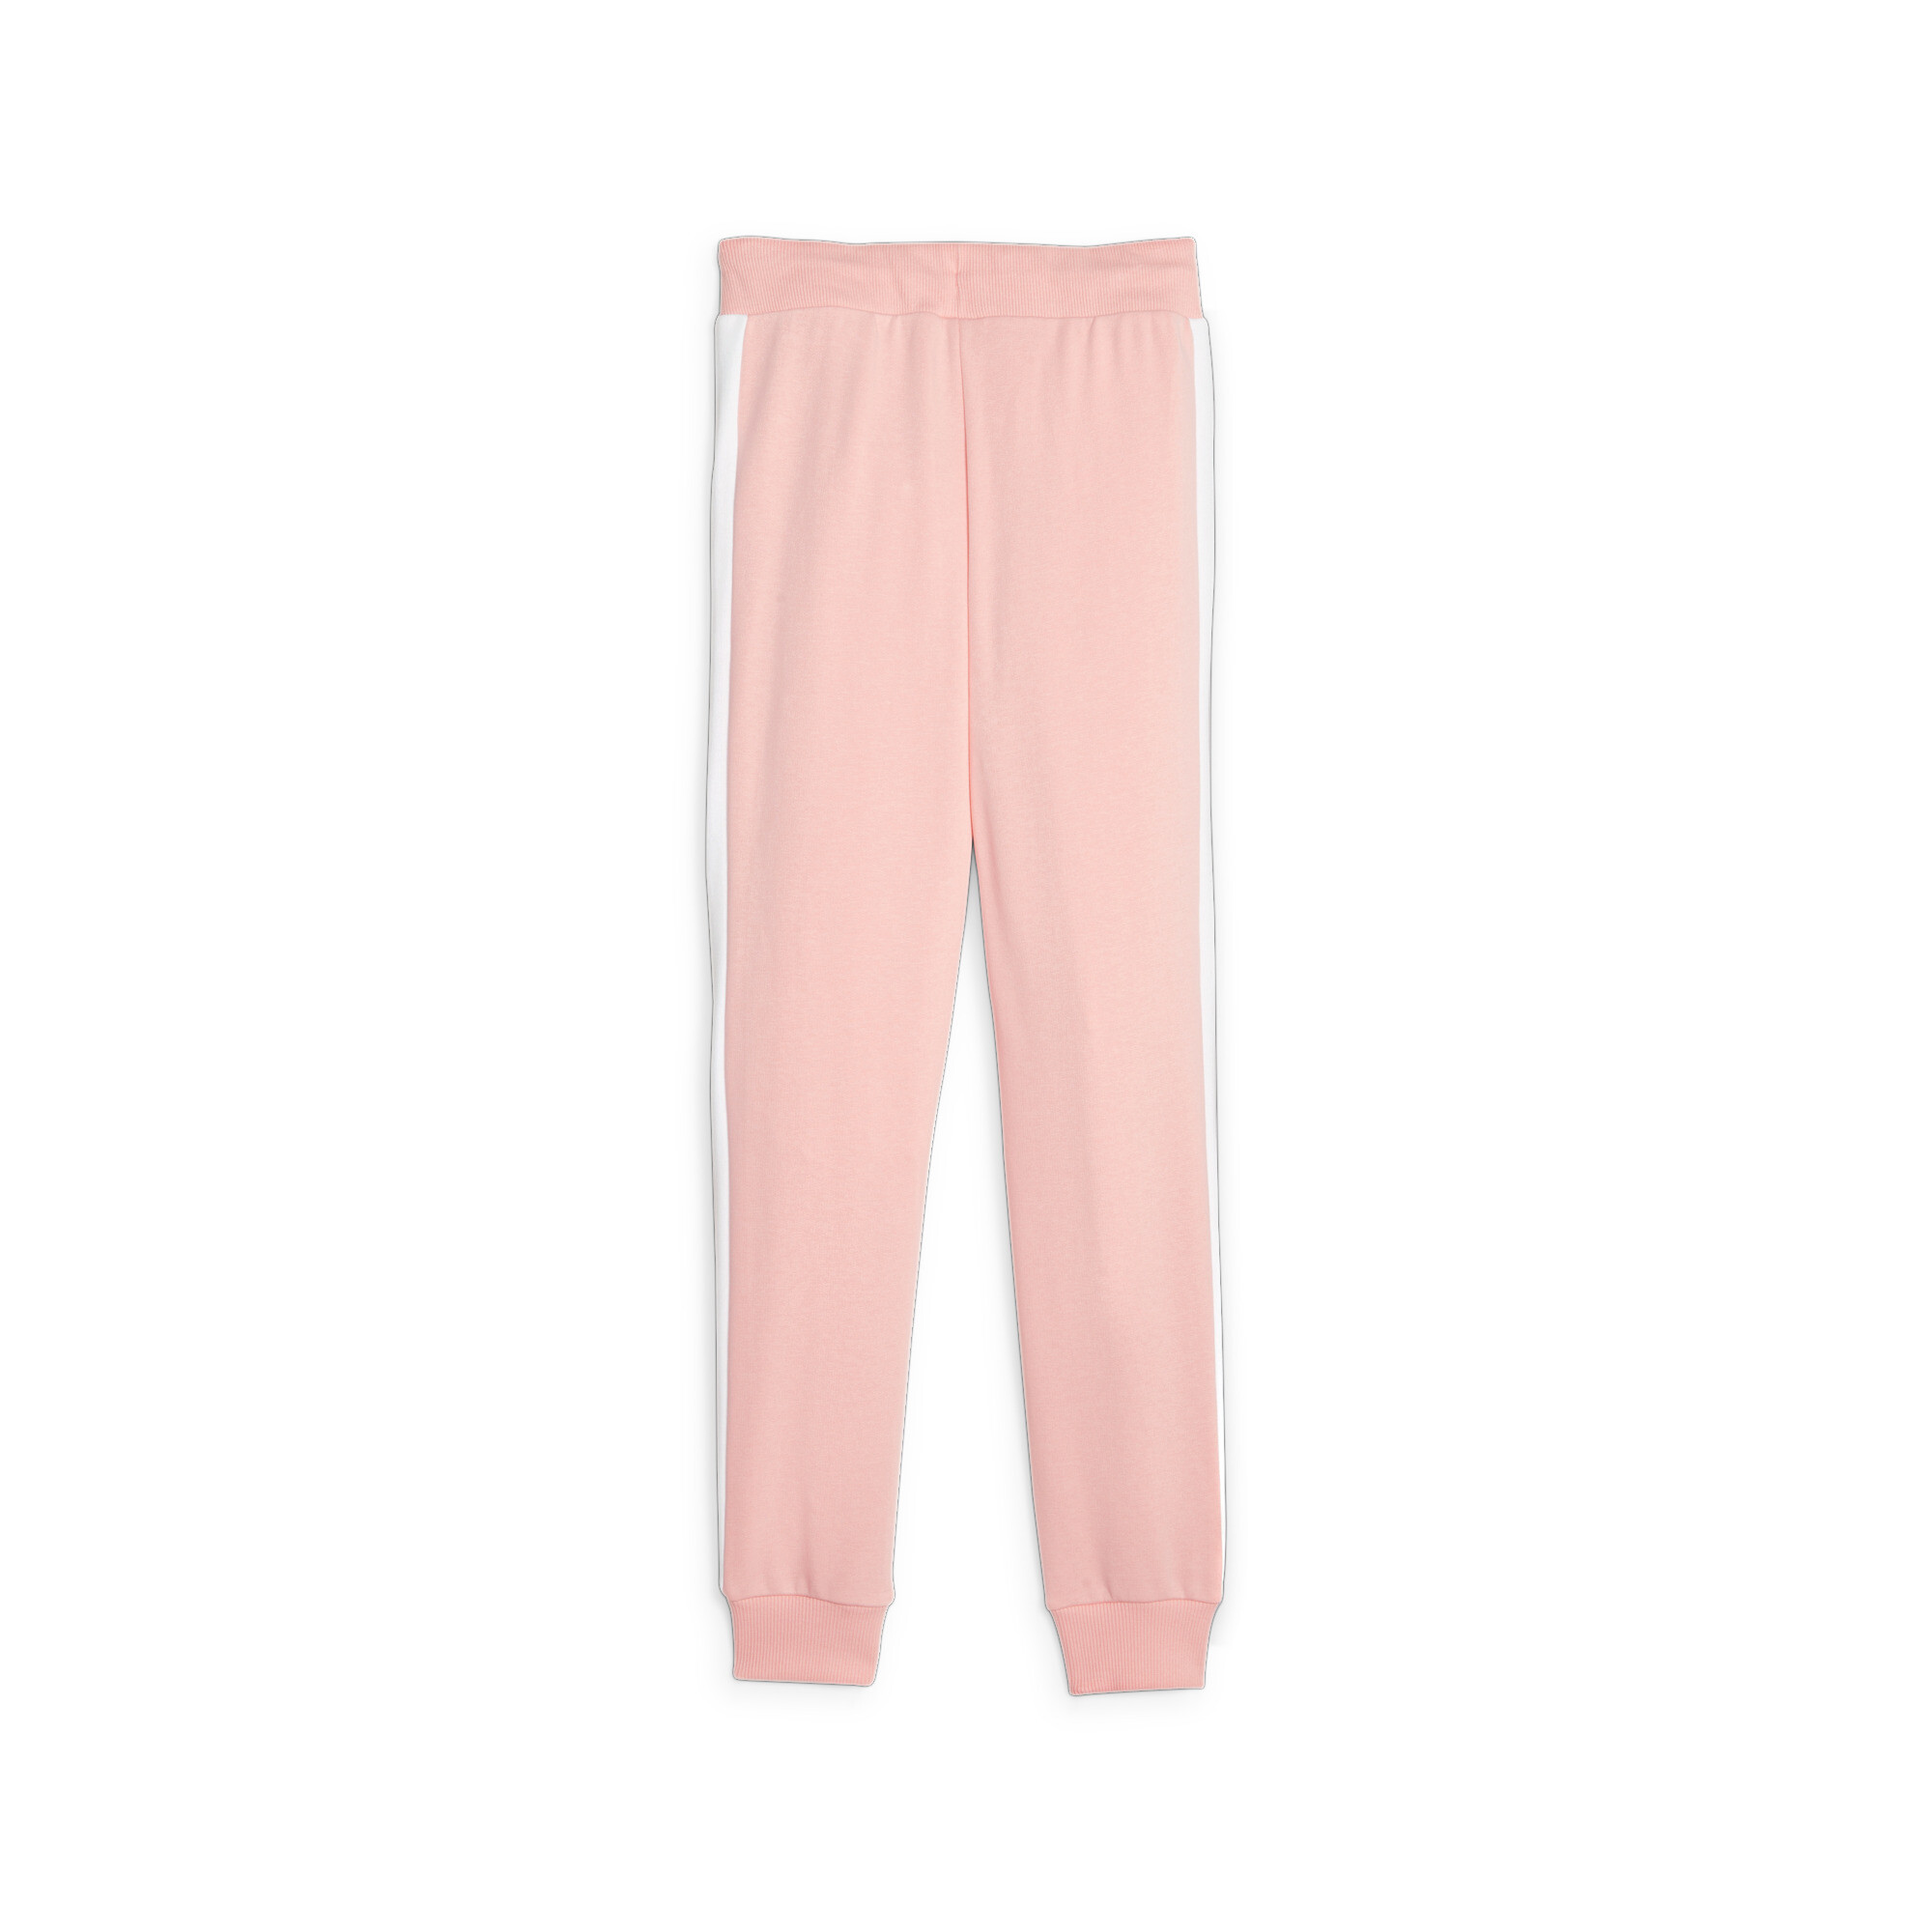 PUMA Classics T7 Track Pants In Pink, Size 4-5 Youth